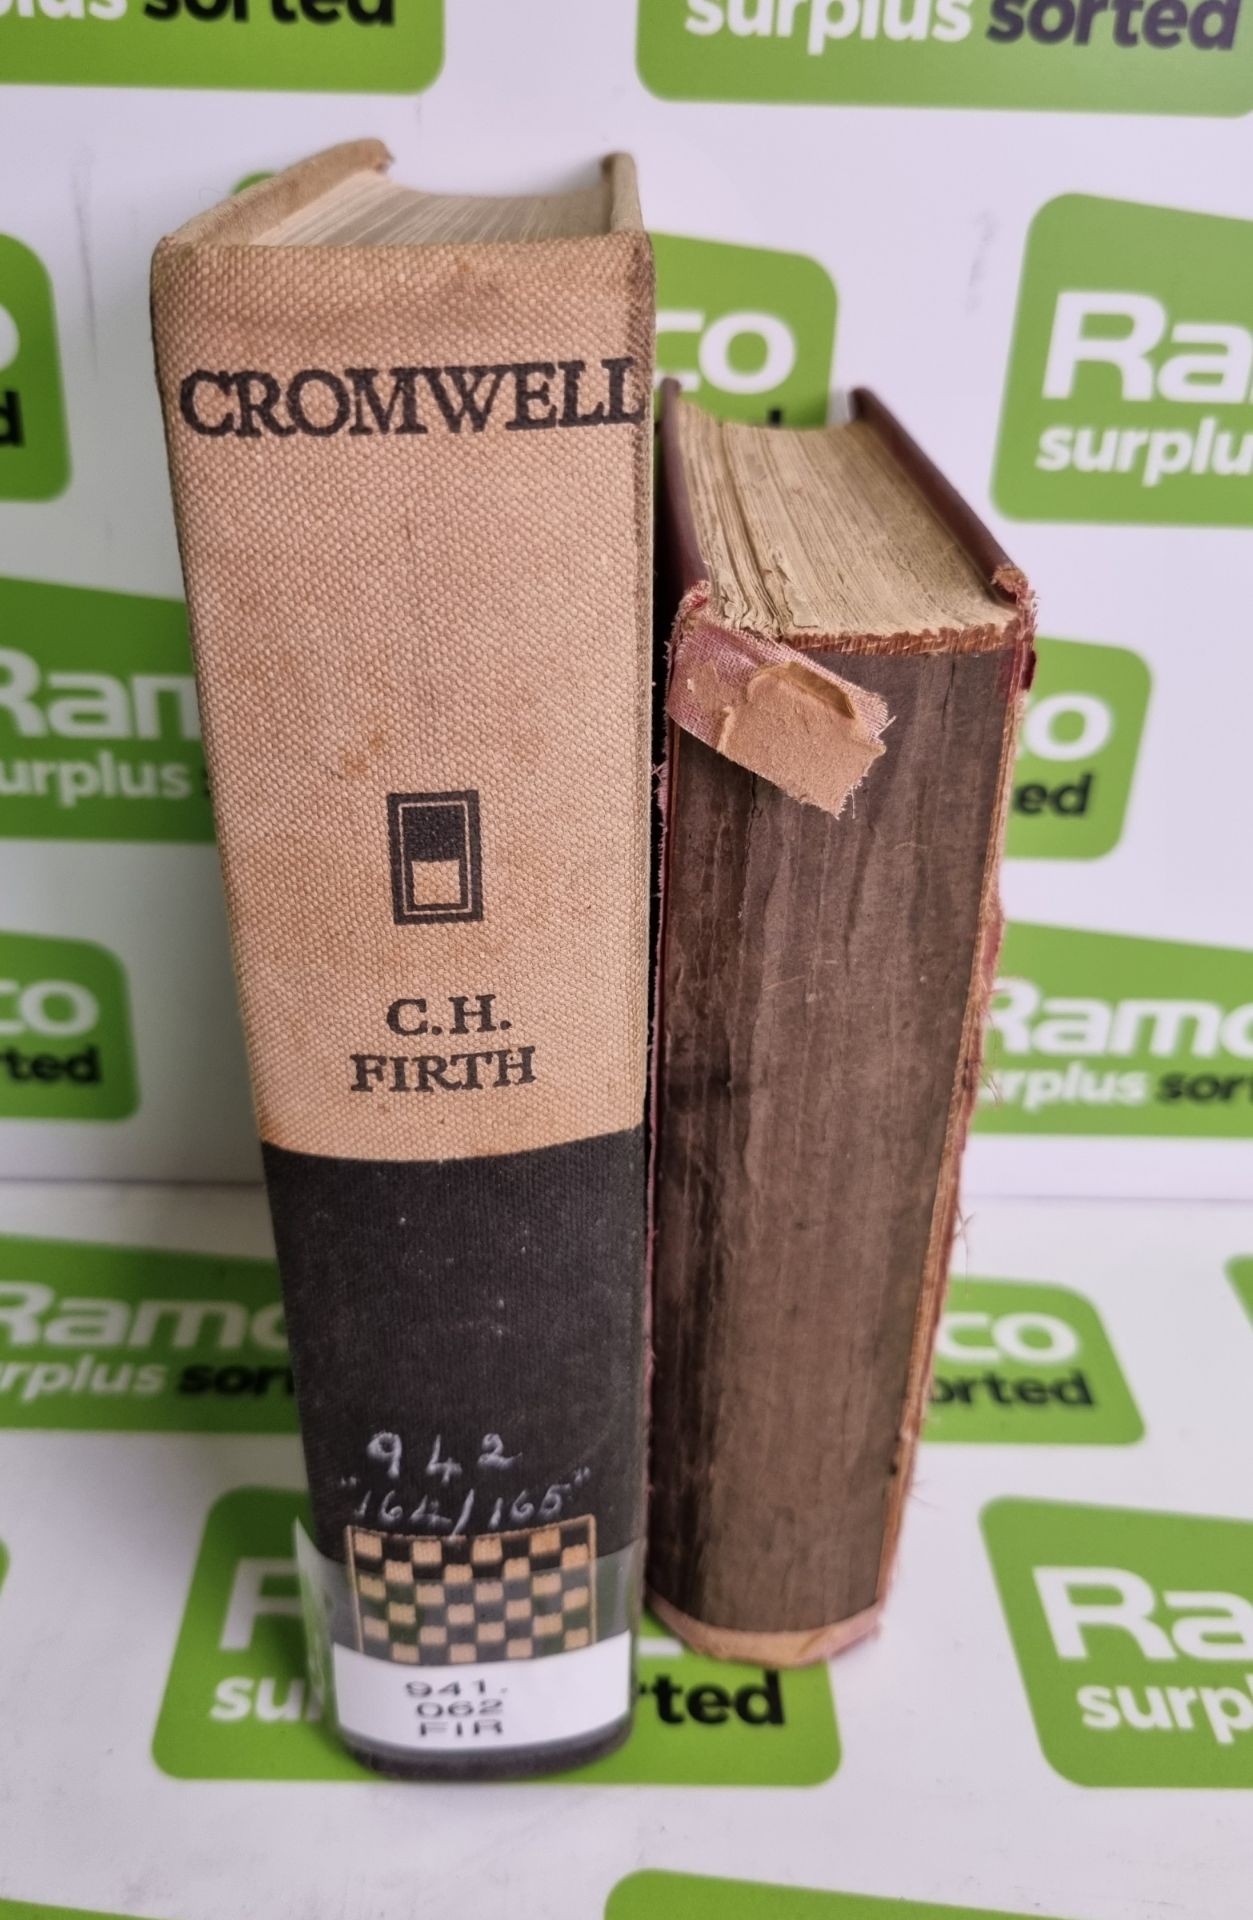 Cromwell : C.H.Firth - London 1935, The History of Florence and the Prince : Niccolo Machiavelli - Image 2 of 9